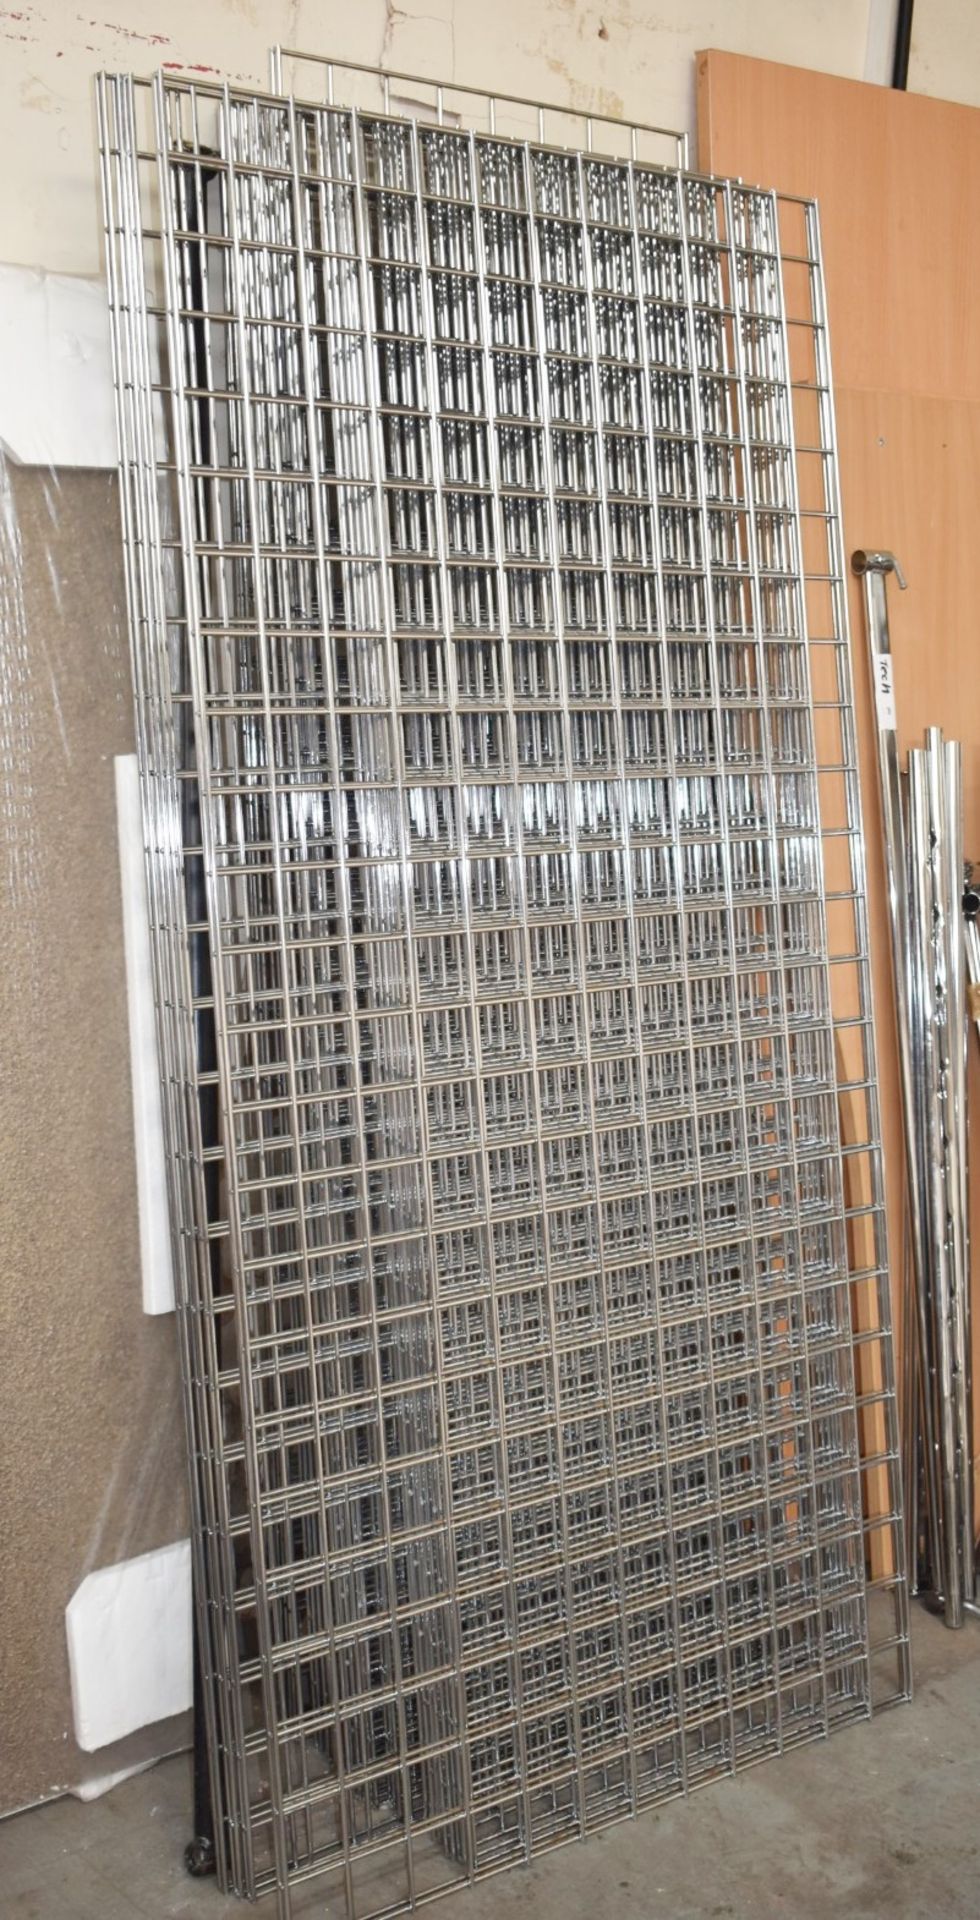 6 x Gridwall Mesh Wall Panels - Heavy Metal Construction in Chrome - Ideal For Making Security Cages